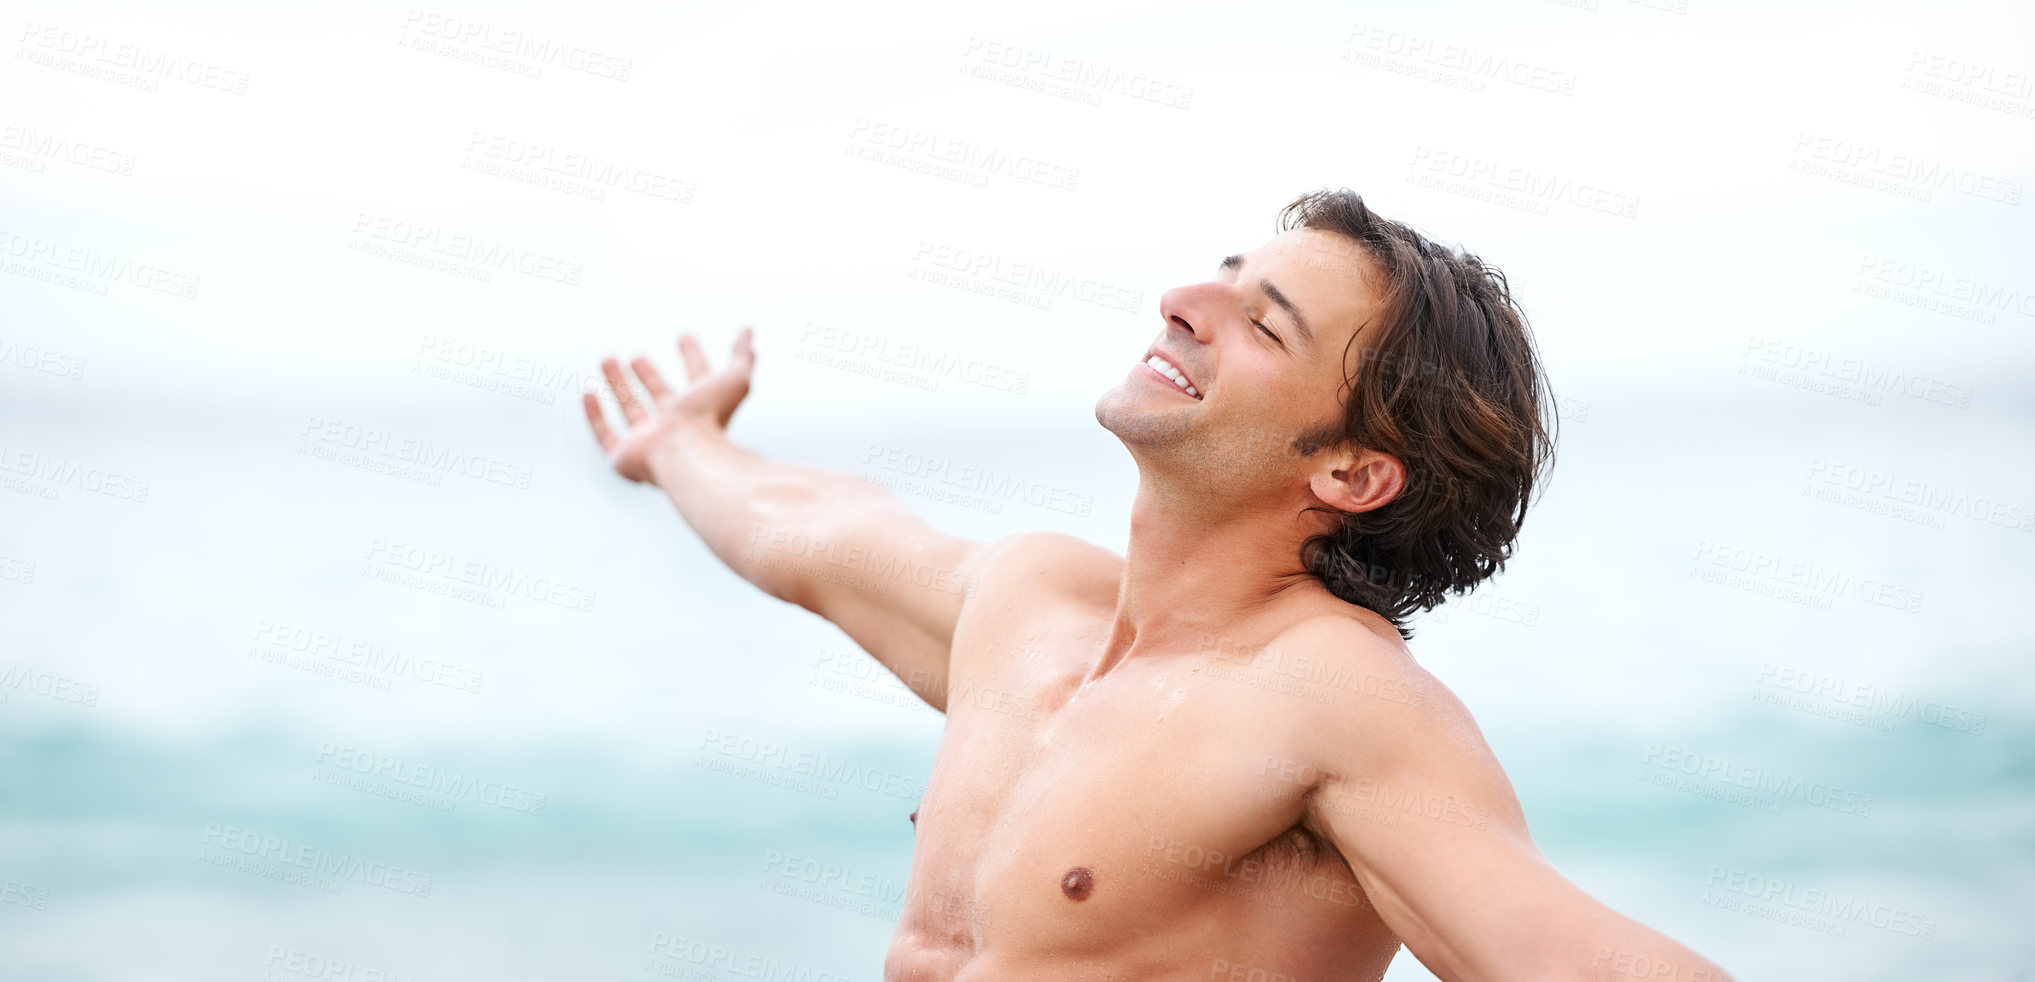 Buy stock photo Shot of a handsome young man enjoying an amazing day at the beach